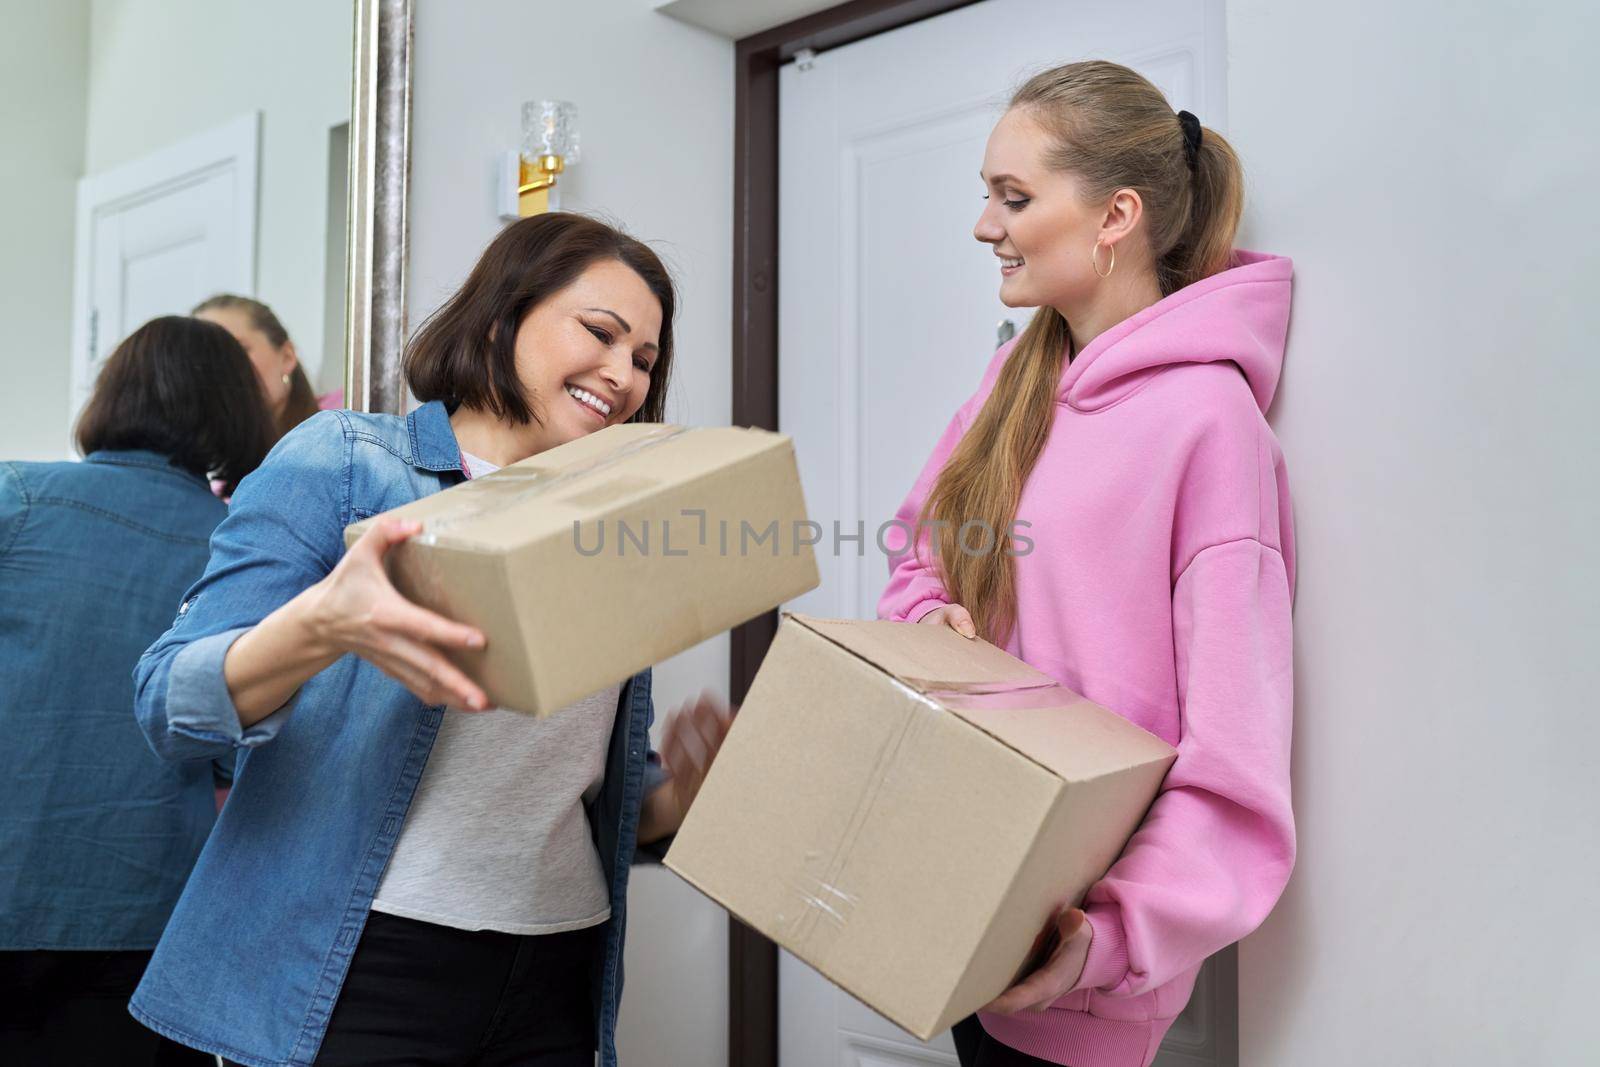 Delivery of goods, social services, post, home, lifestyle, online shopping. Two women with cardboard boxes near the front door of the house